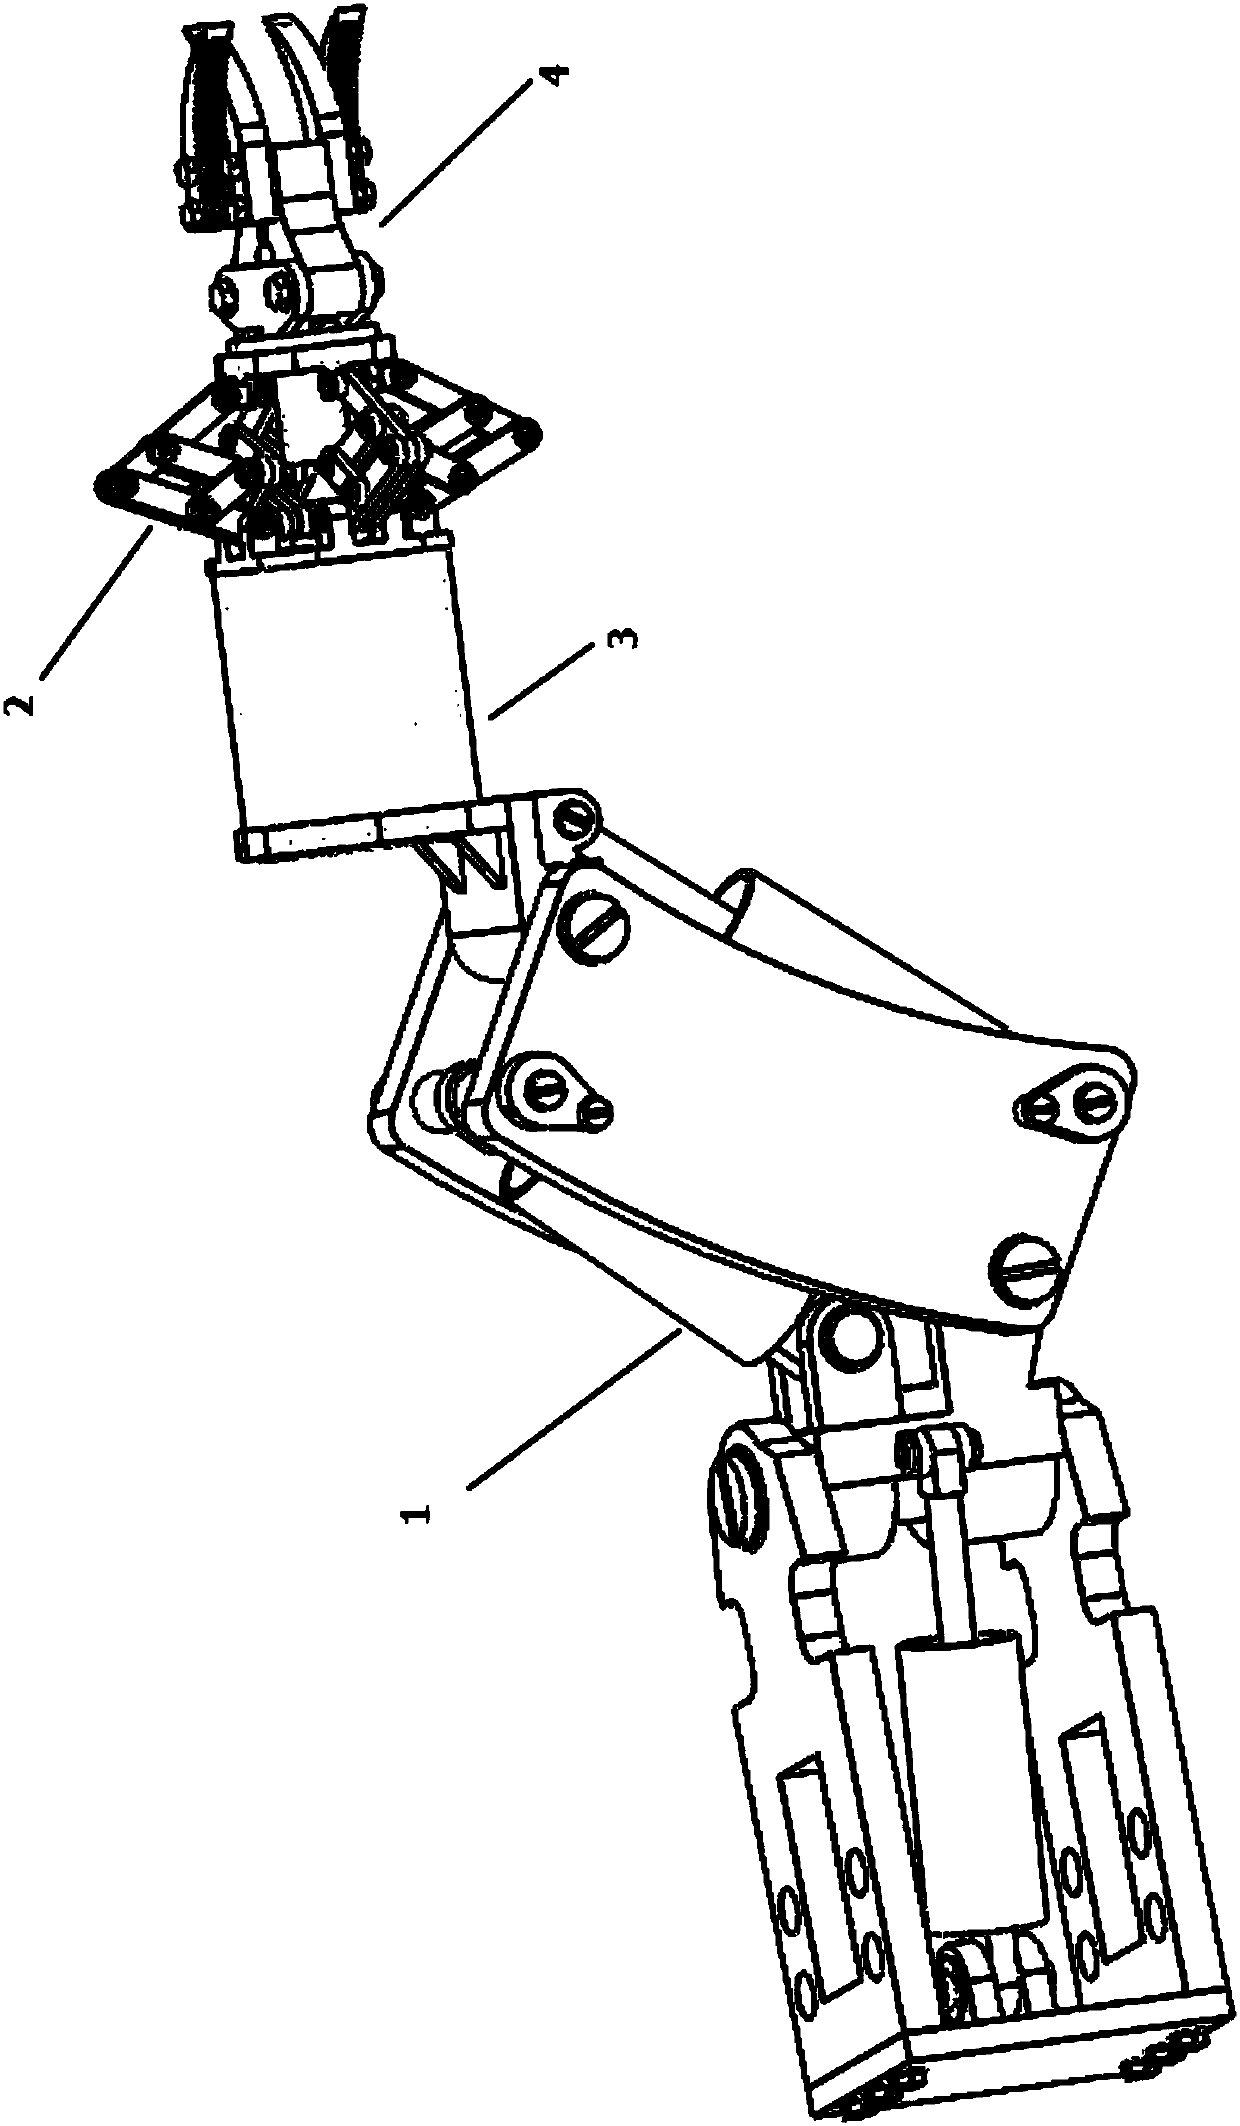 Macro-micro-mechanical arm used for underwater robot